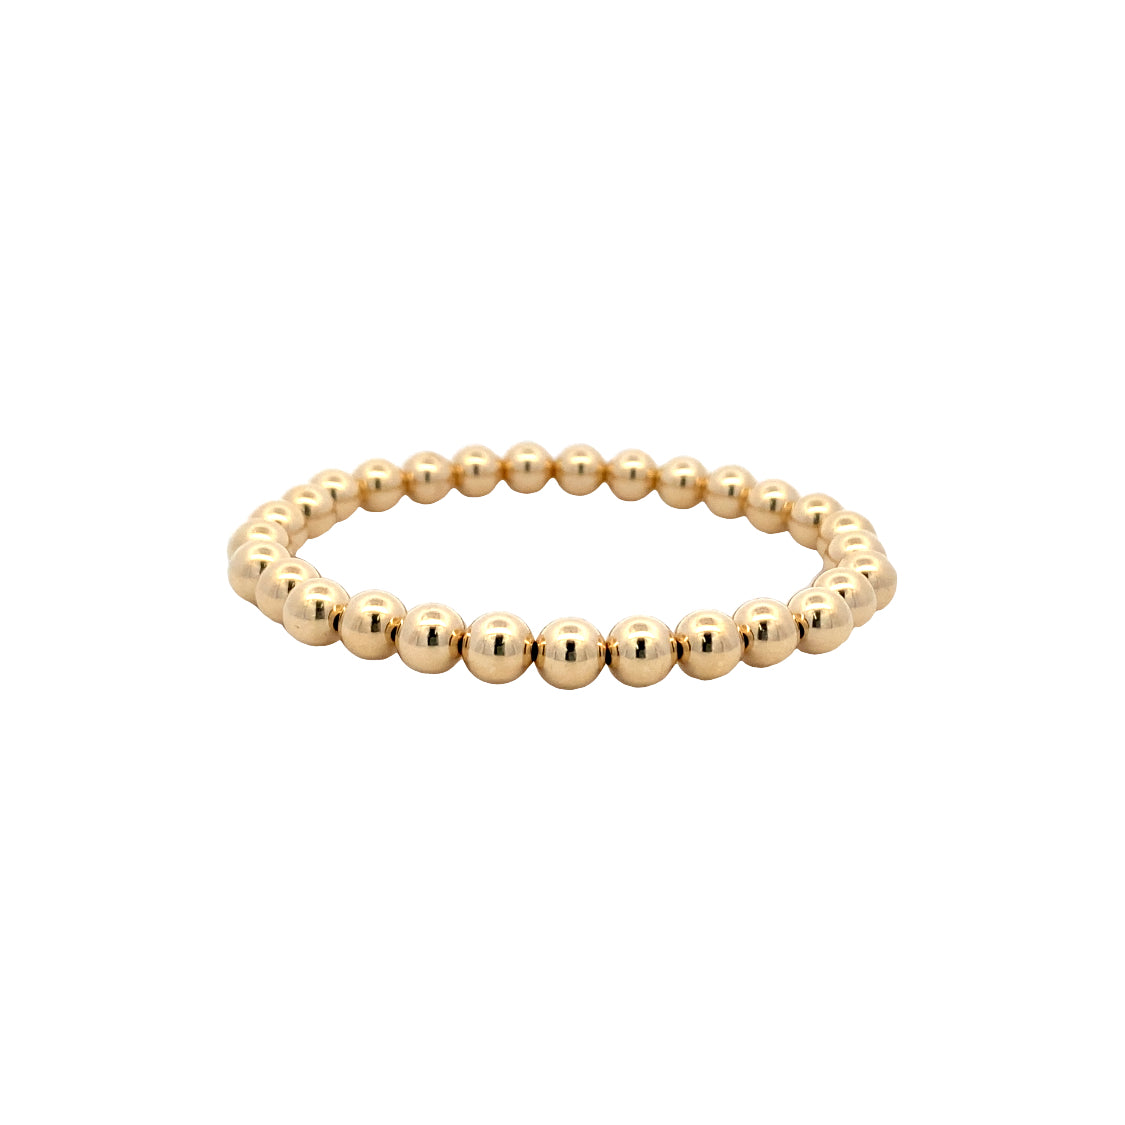 Stretch 6mm Yellow Gold Filled Bead Bracelet